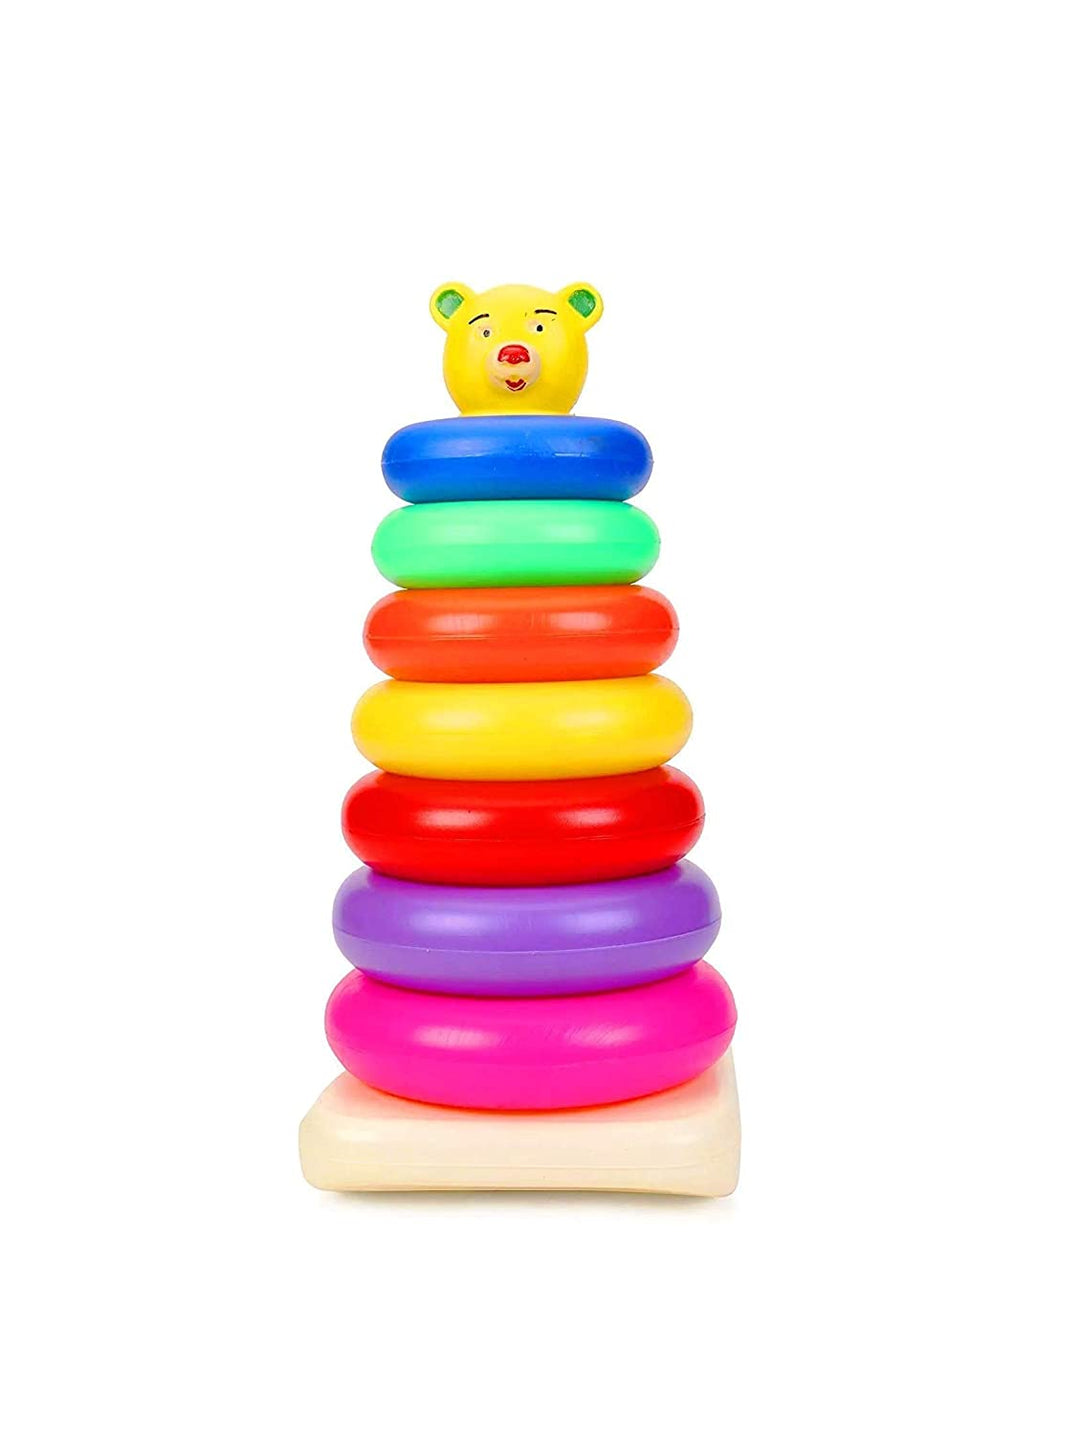 Ratna's Stacking Colouring Teddy 7 Rings (Big) Educational Toy for Preschoolers Kids 24 months - Multicolour Stack A Ring Stacking & Sorting Toy with 7 Rings , Helps to Kids Recognize, Grasp, Shake and Stack up